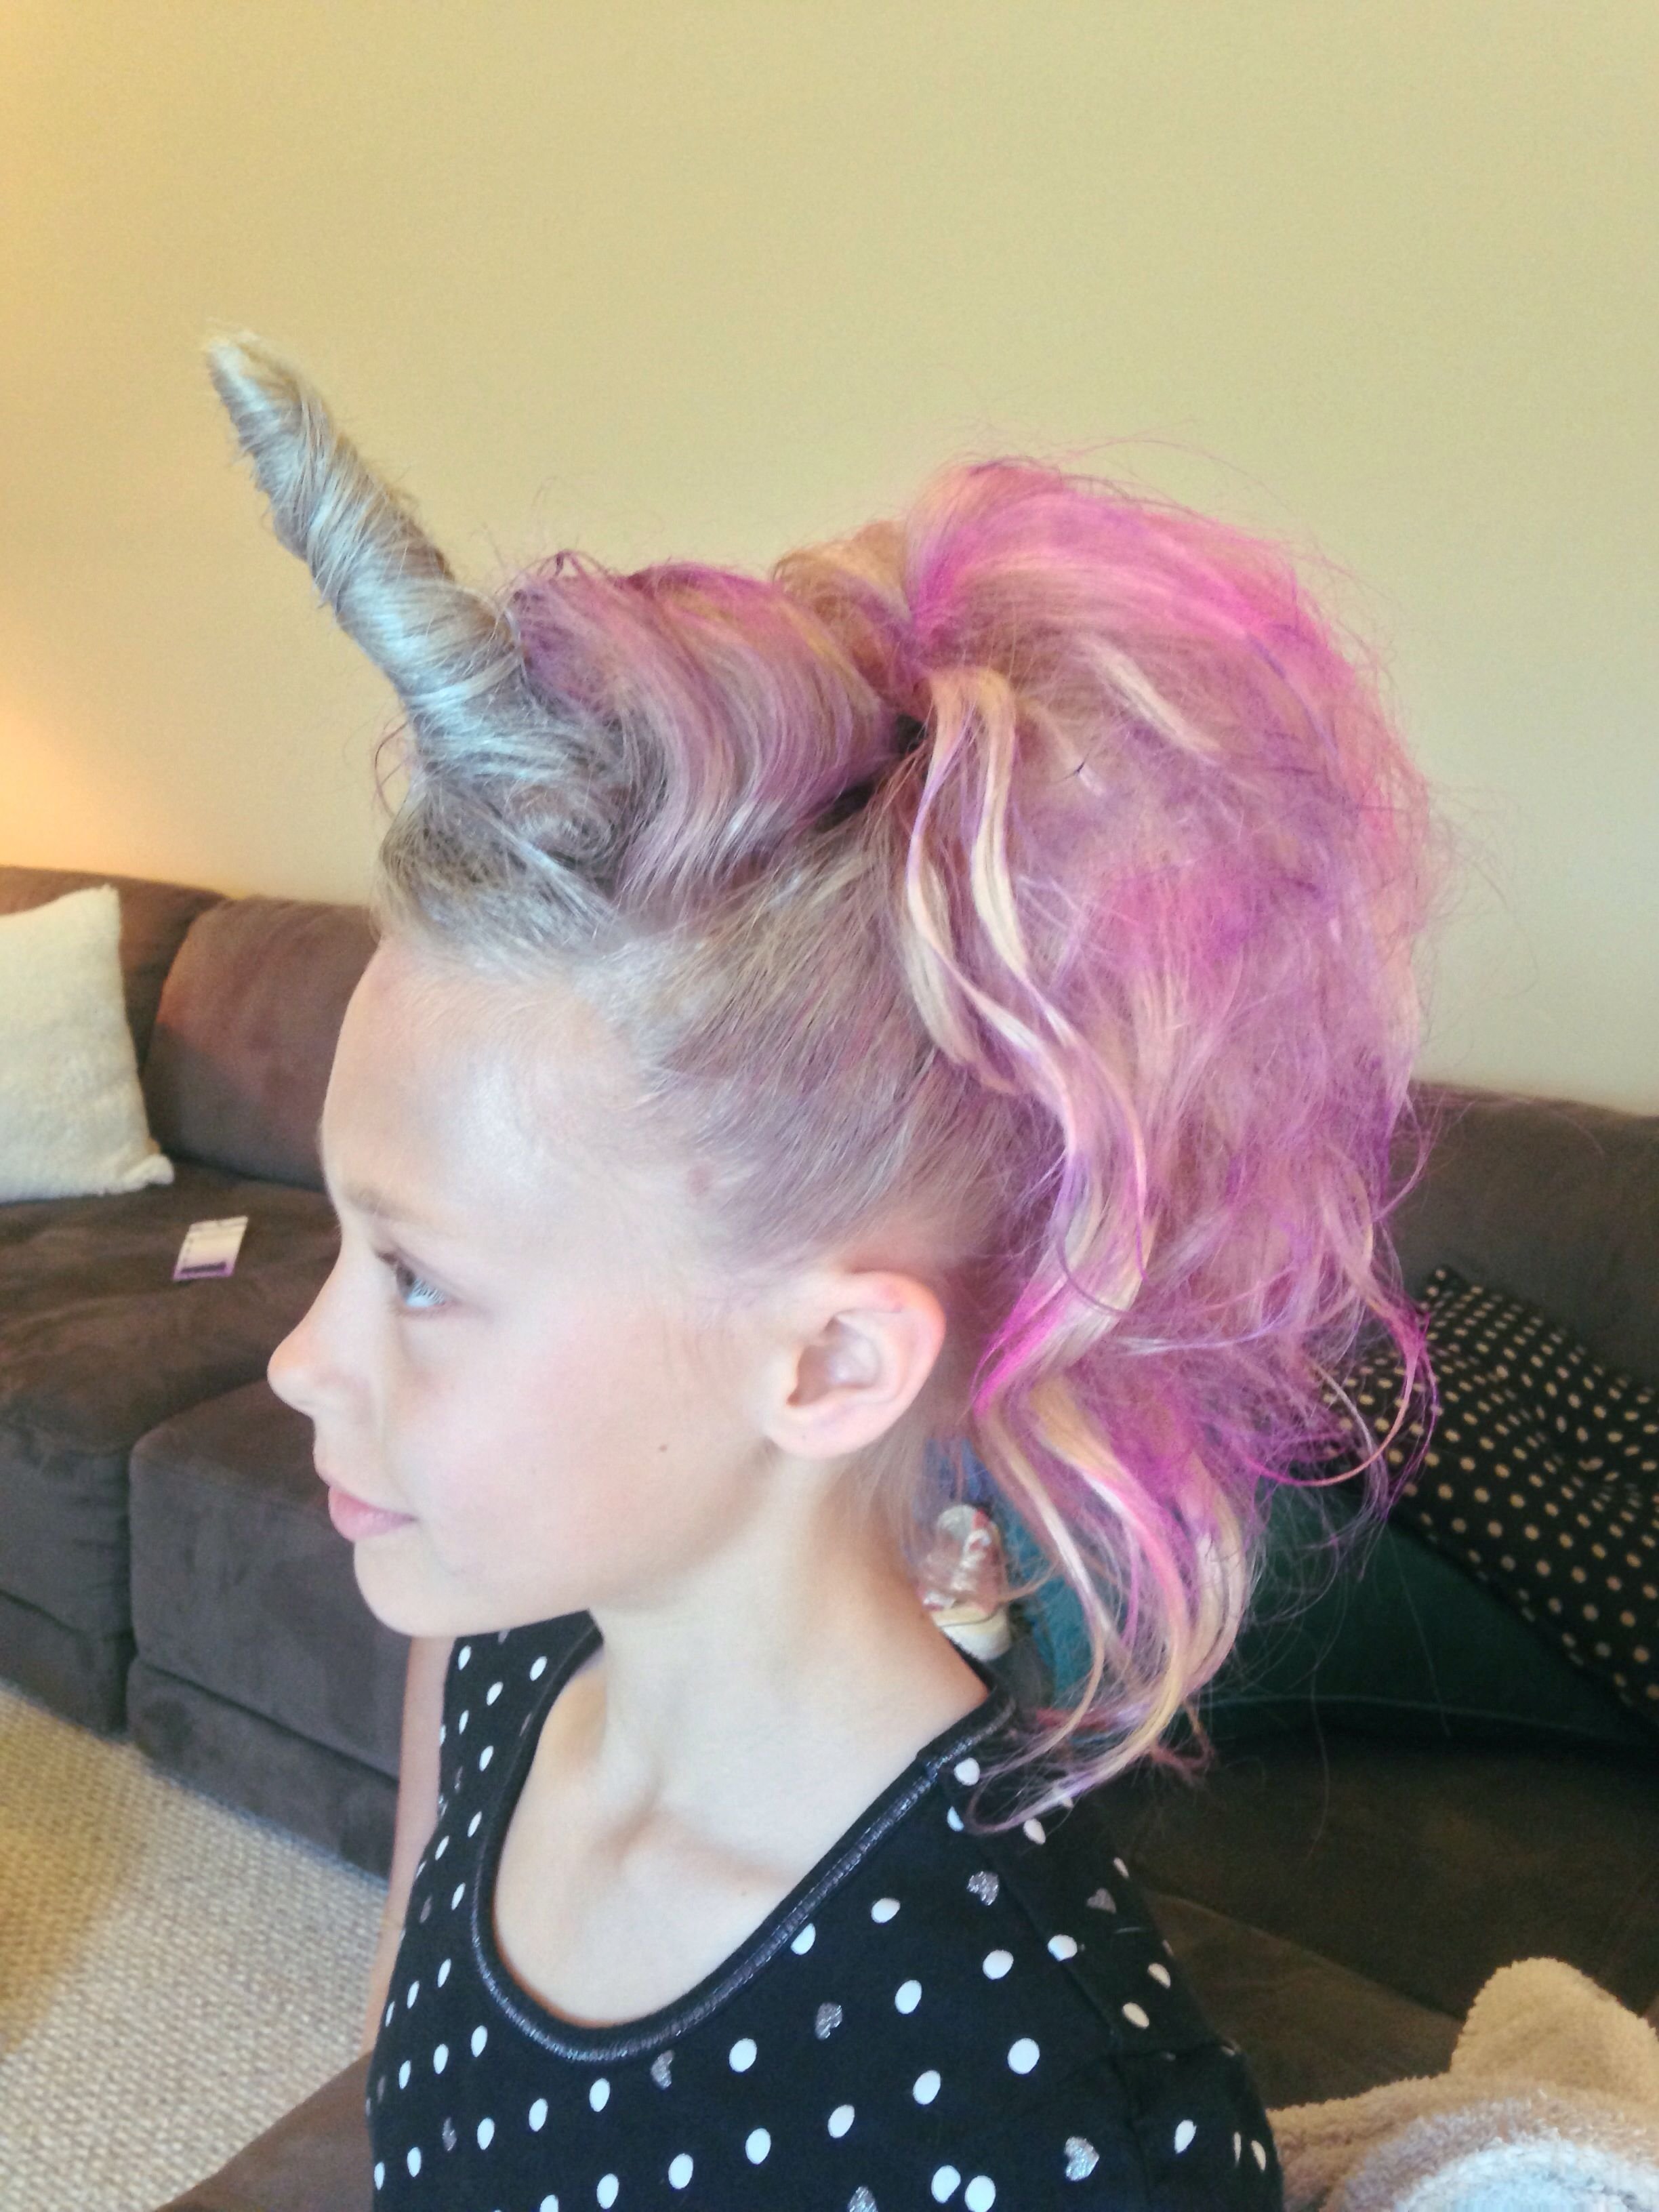 10 Fashionable Crazy Hair Day Ideas For Girls 18 crazy hair day ideas for girls boys crazy hair pony hair and 2024